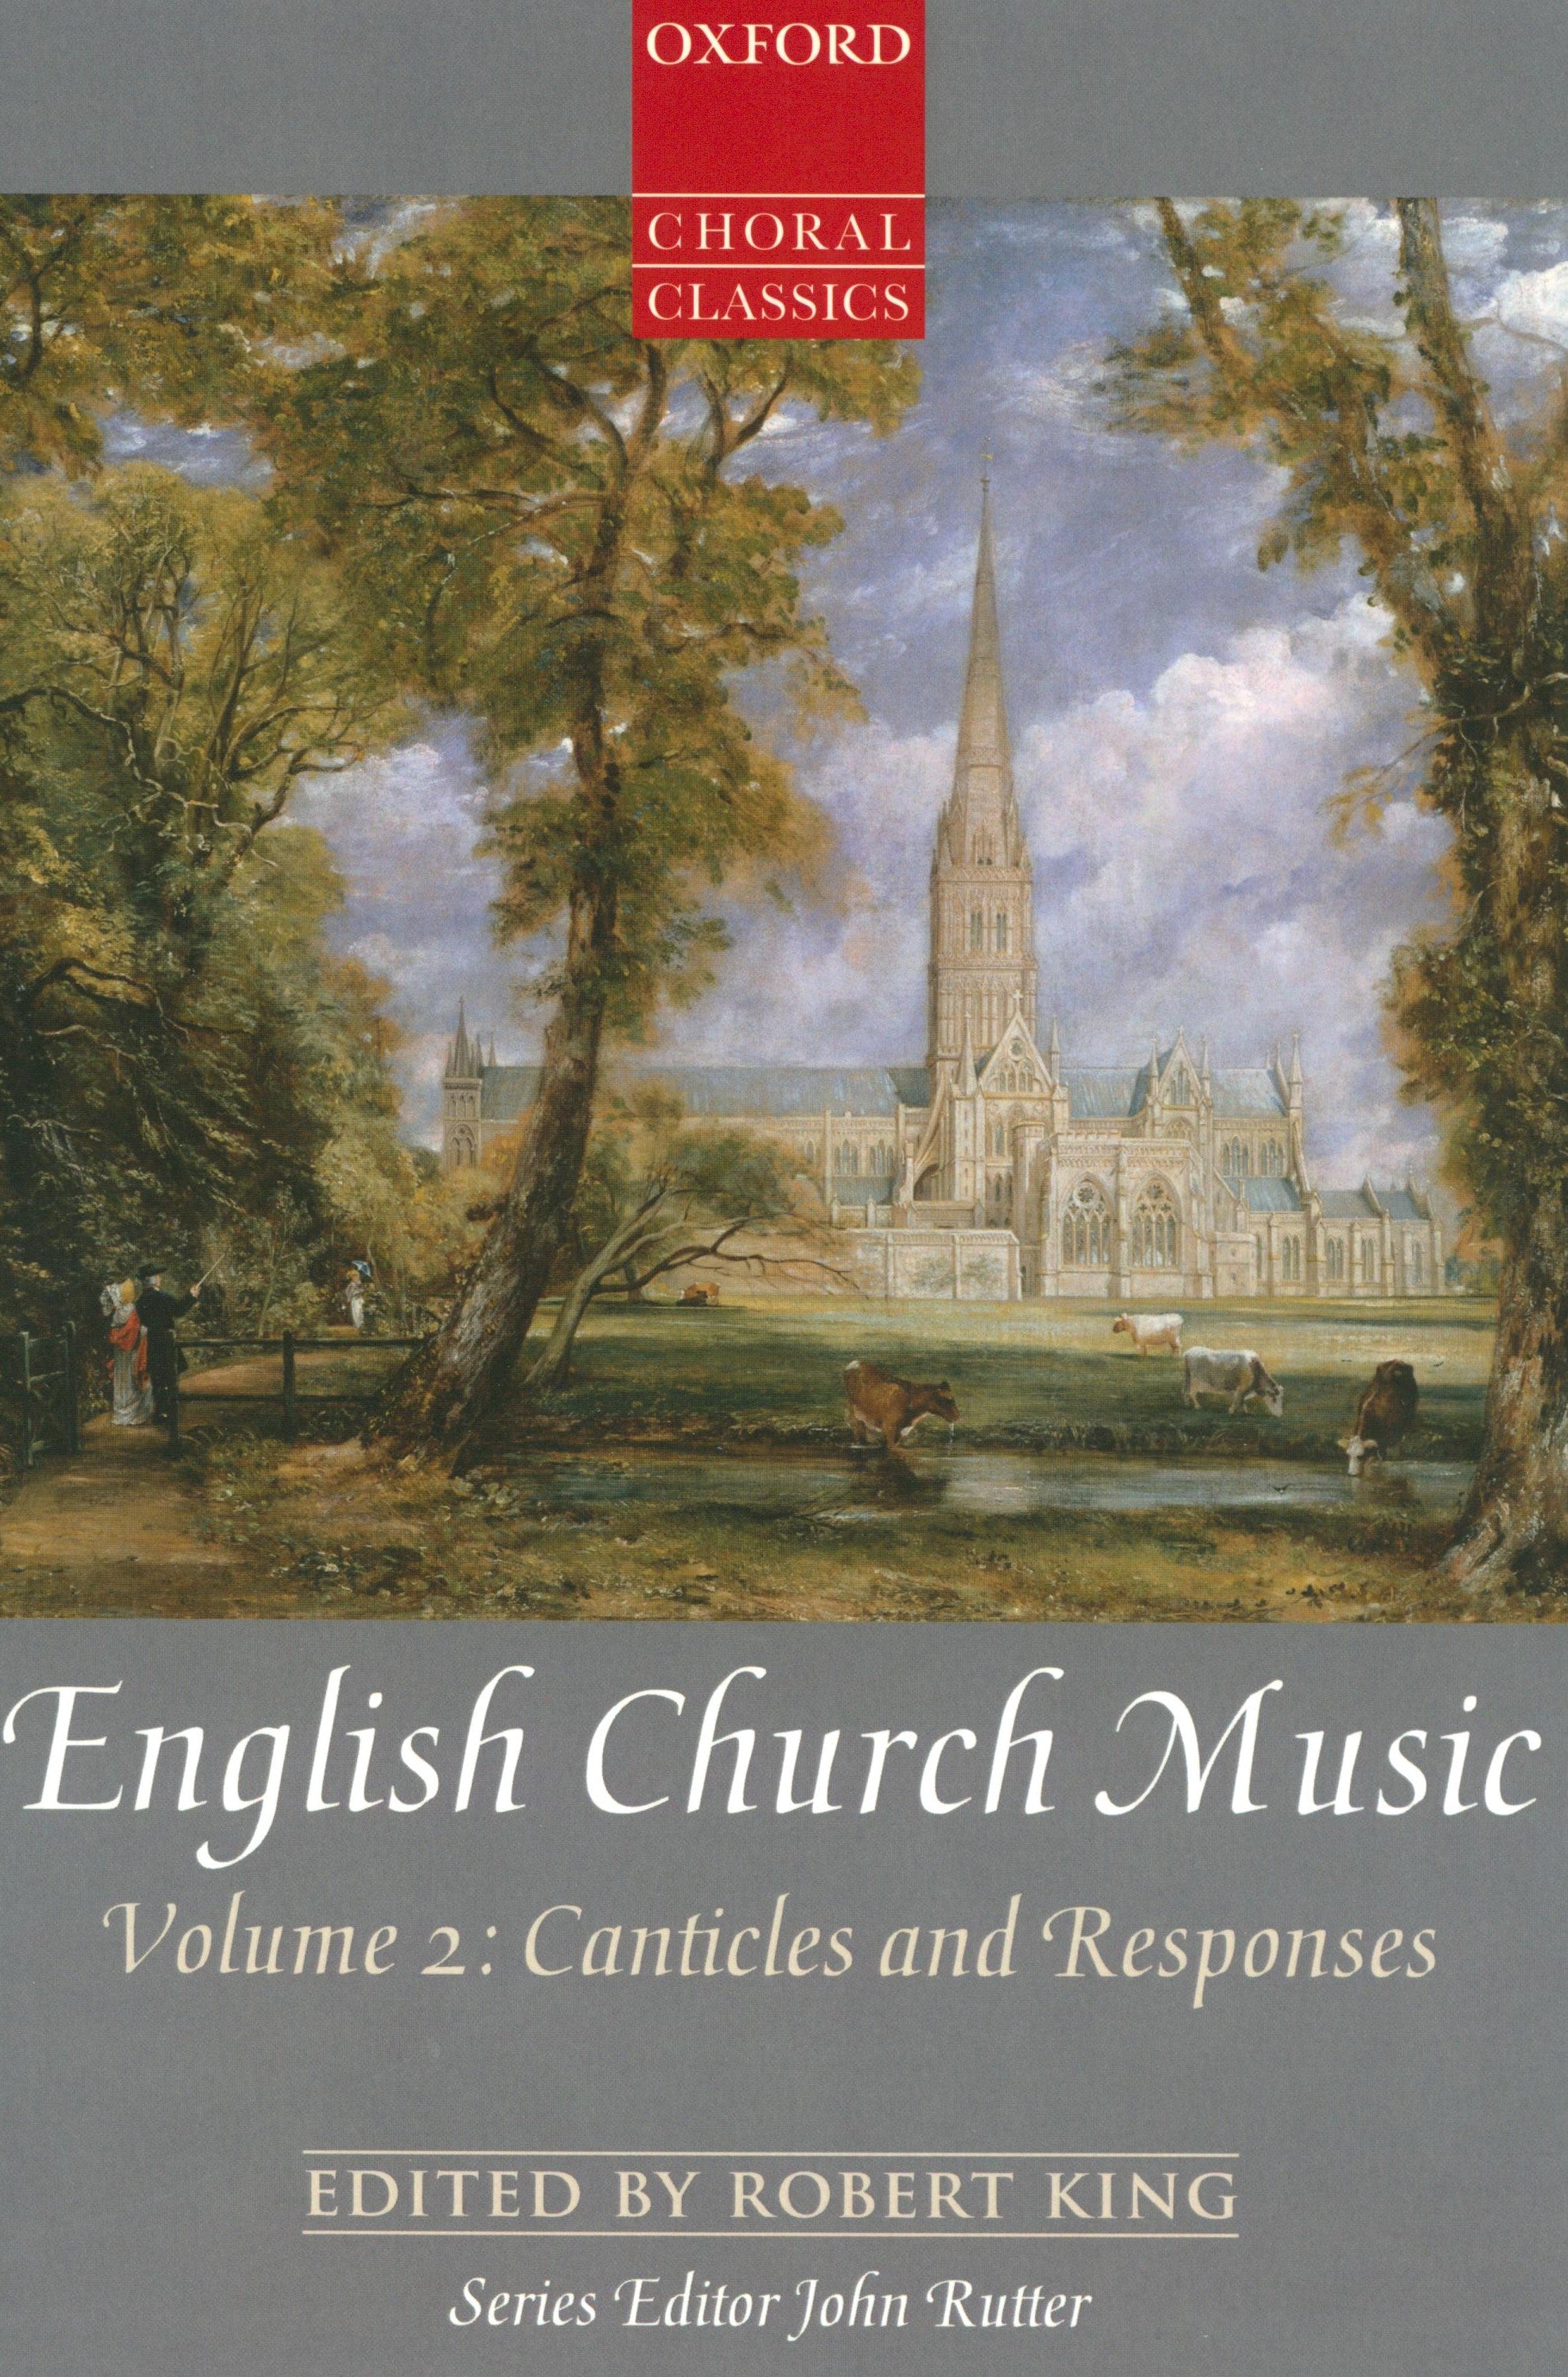 English Church Music - Volume 2: Canticles and Responses